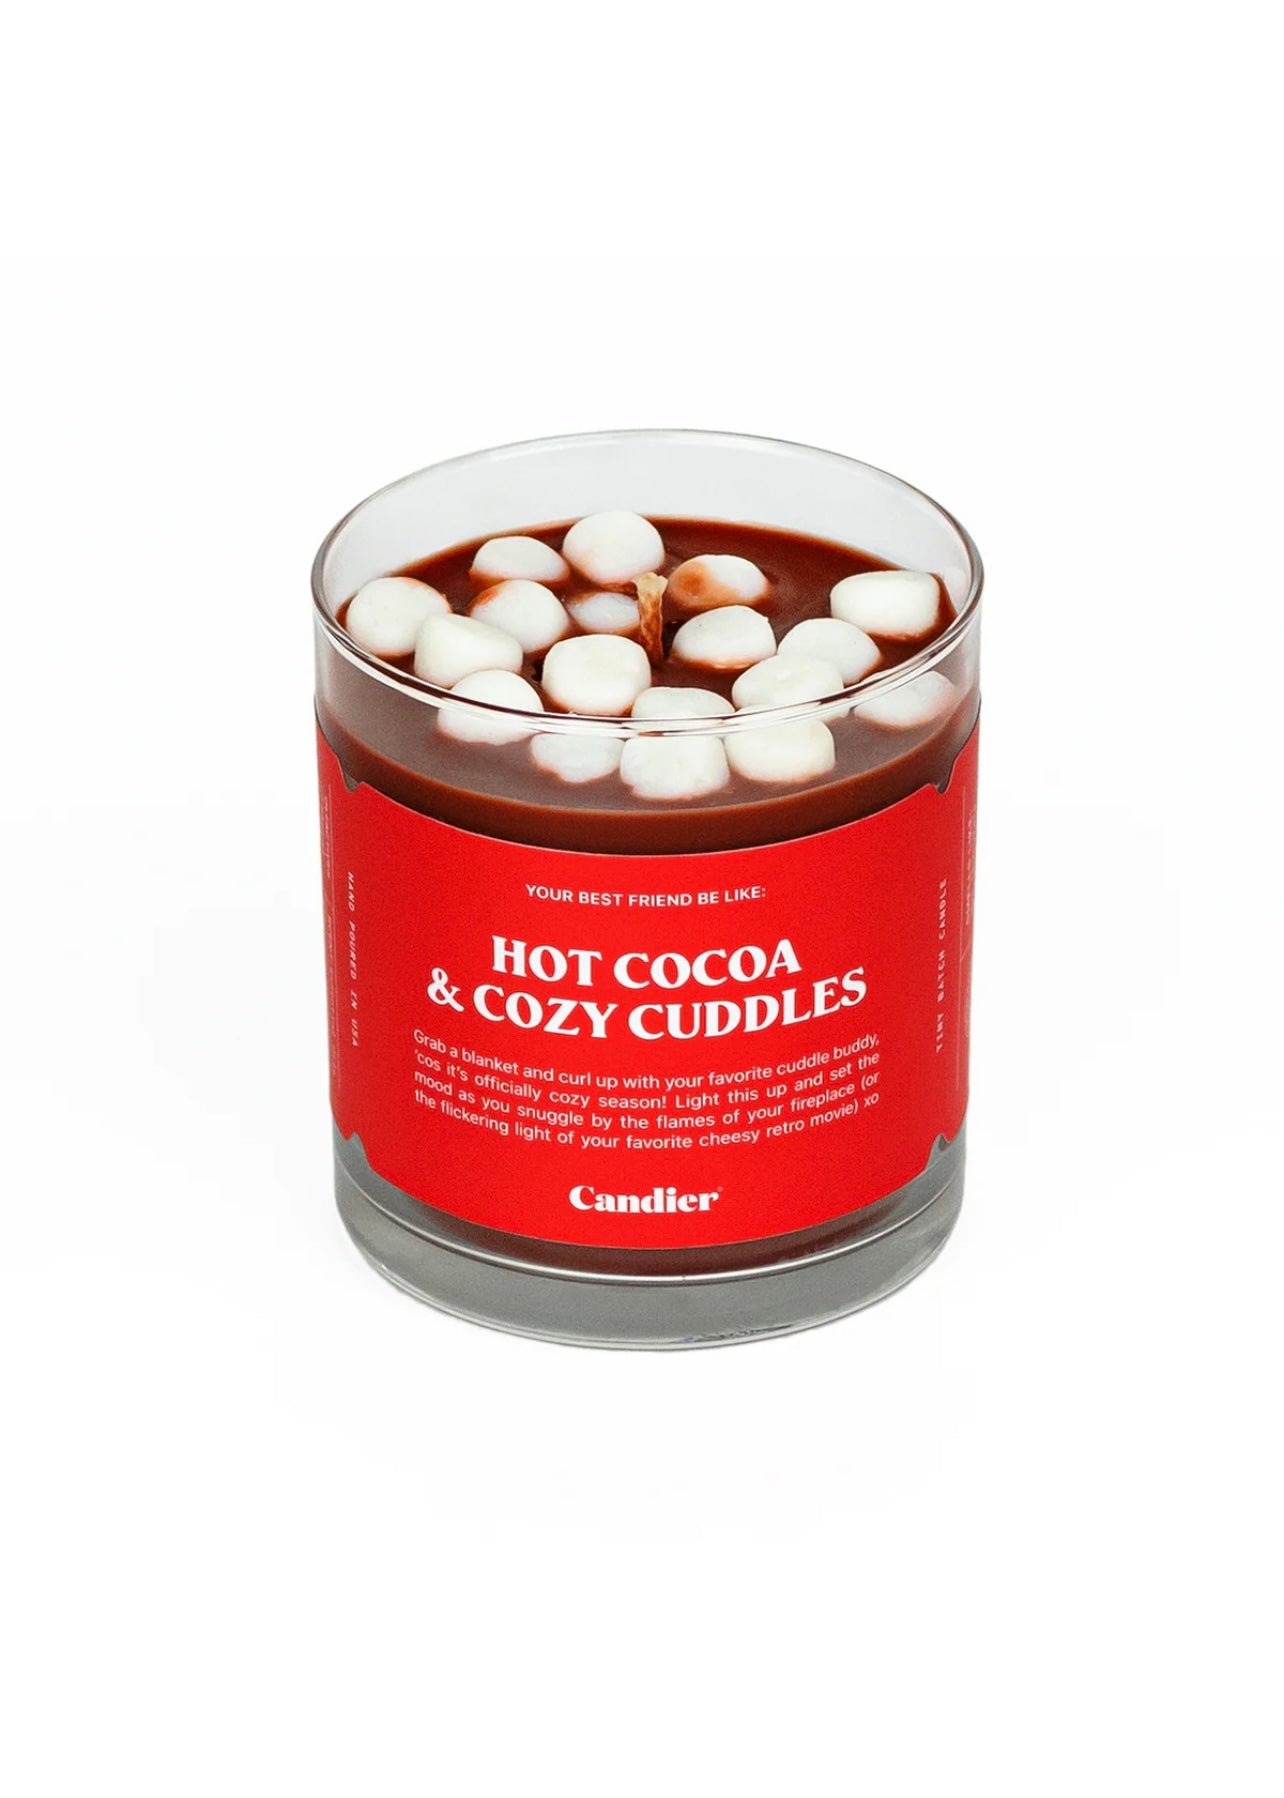 Candier Candles "Hot Cocoa & Cozy Cuddles"